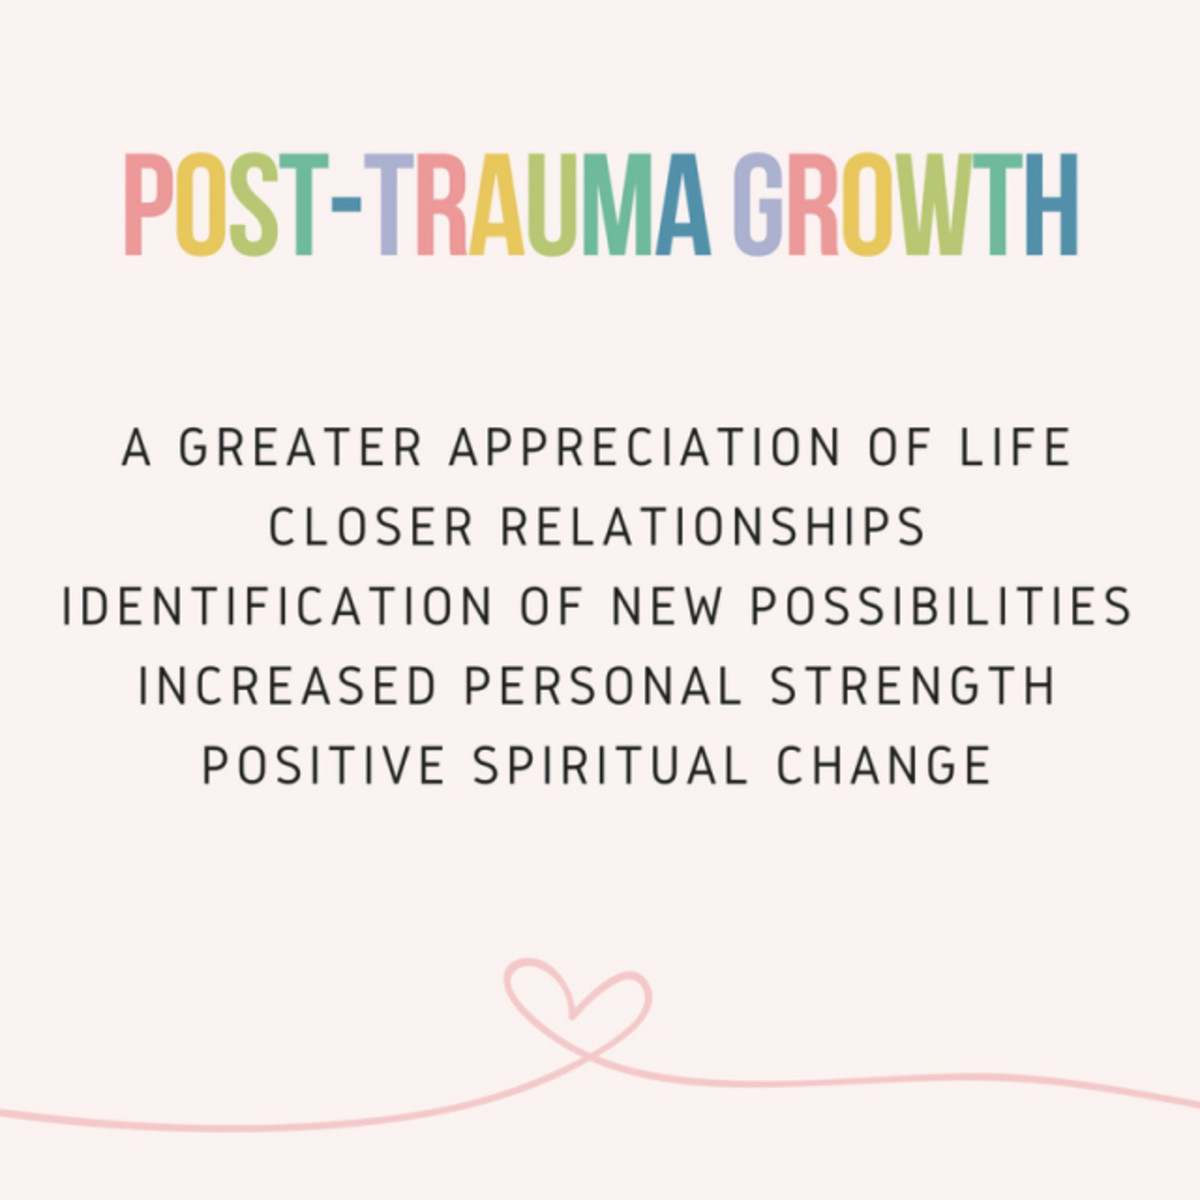 Post Traumatic Growth: The Dawn after Night